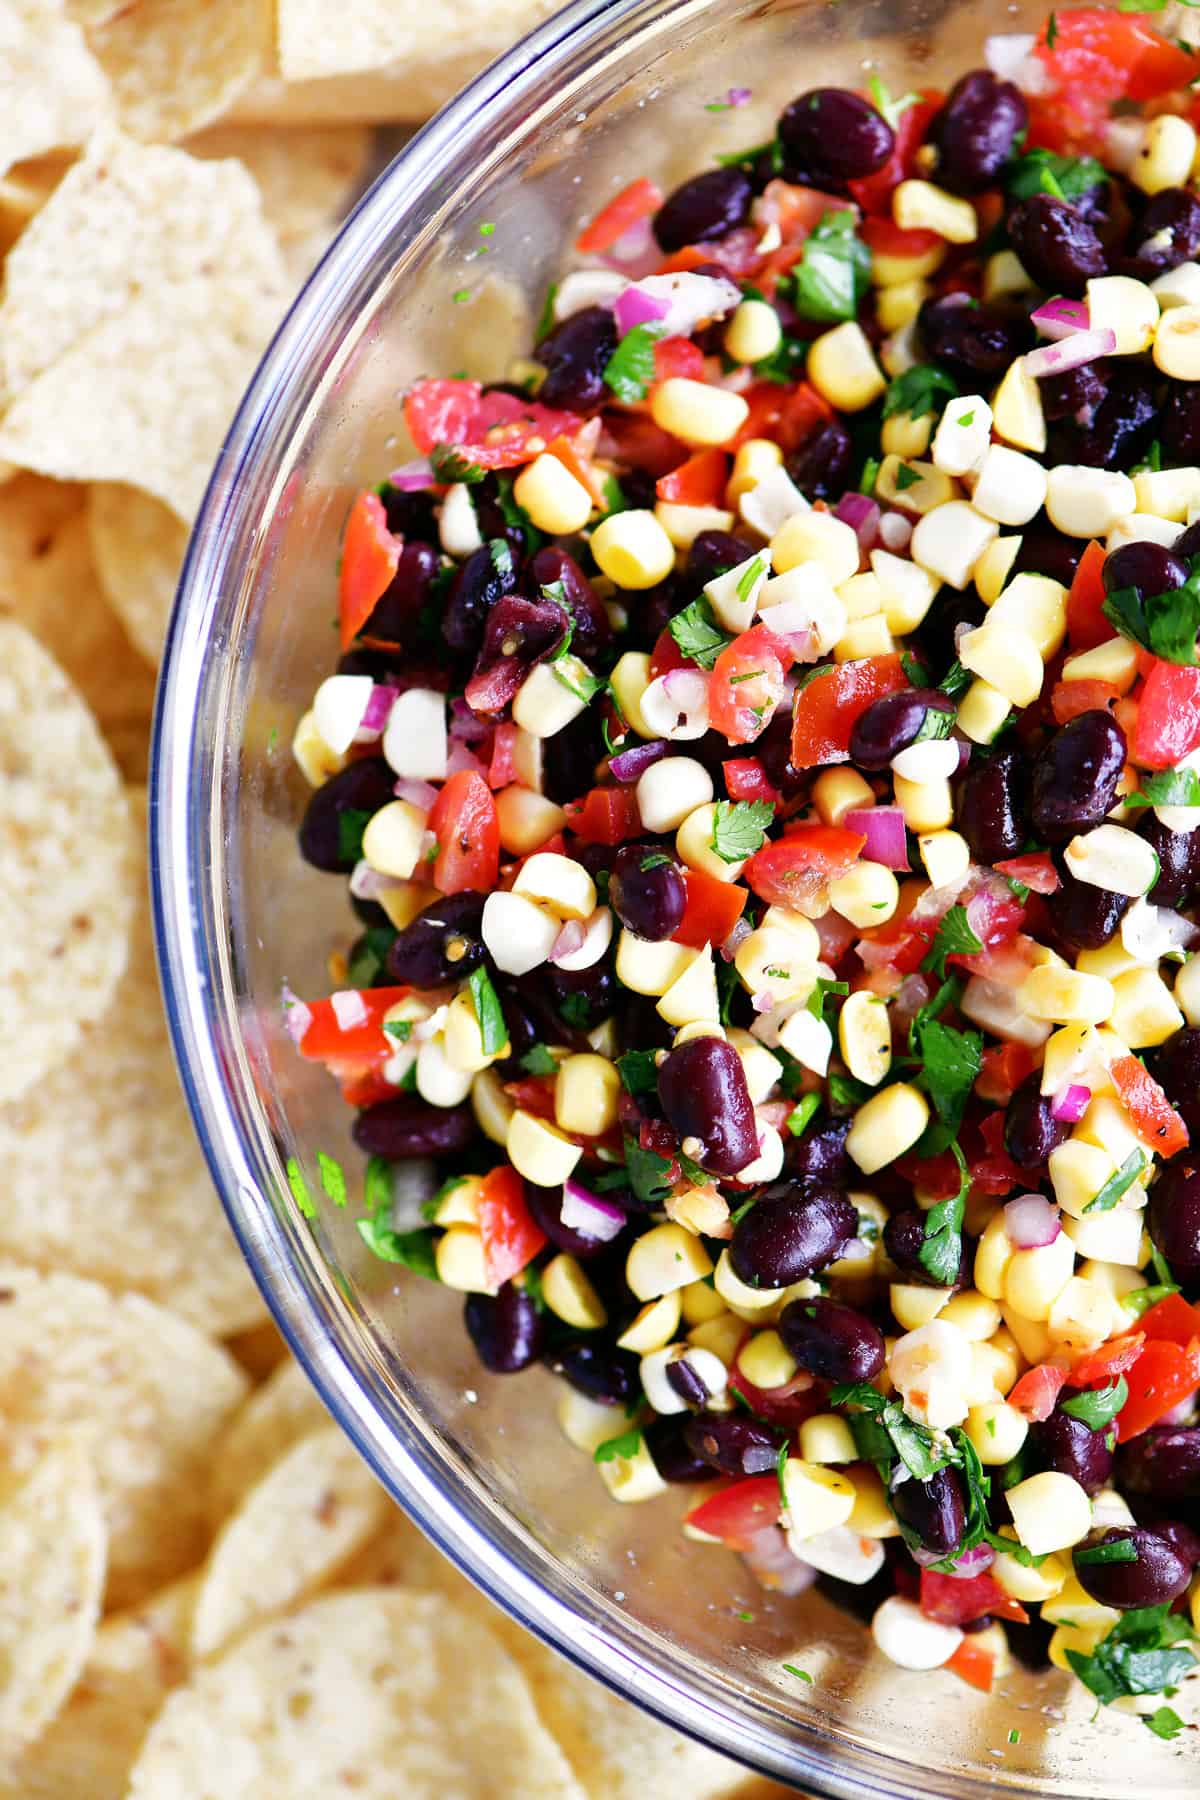 Showing half of the bowl of black bean corn salsa with chips.